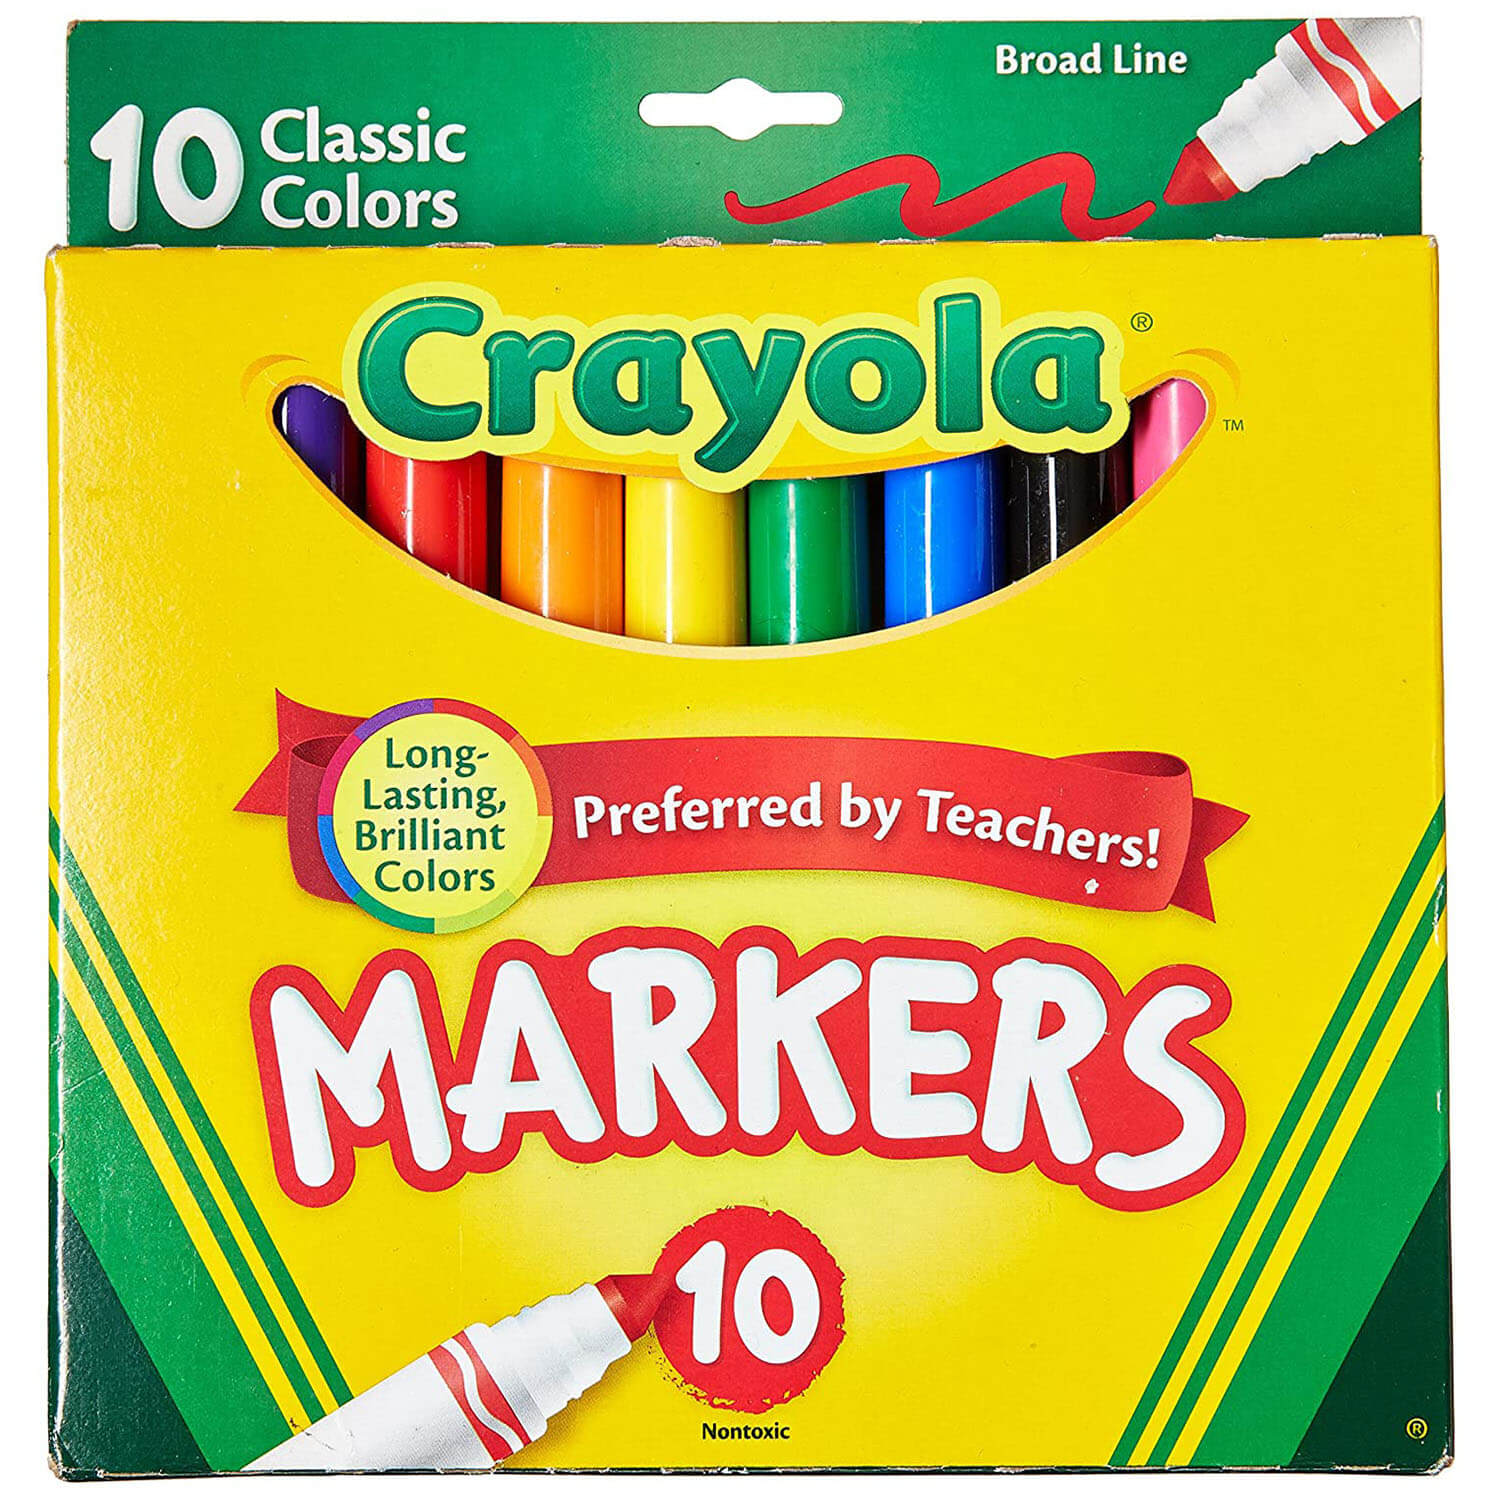 Crayola 10 ct. Classic, Broad Line, ColorMax Markers